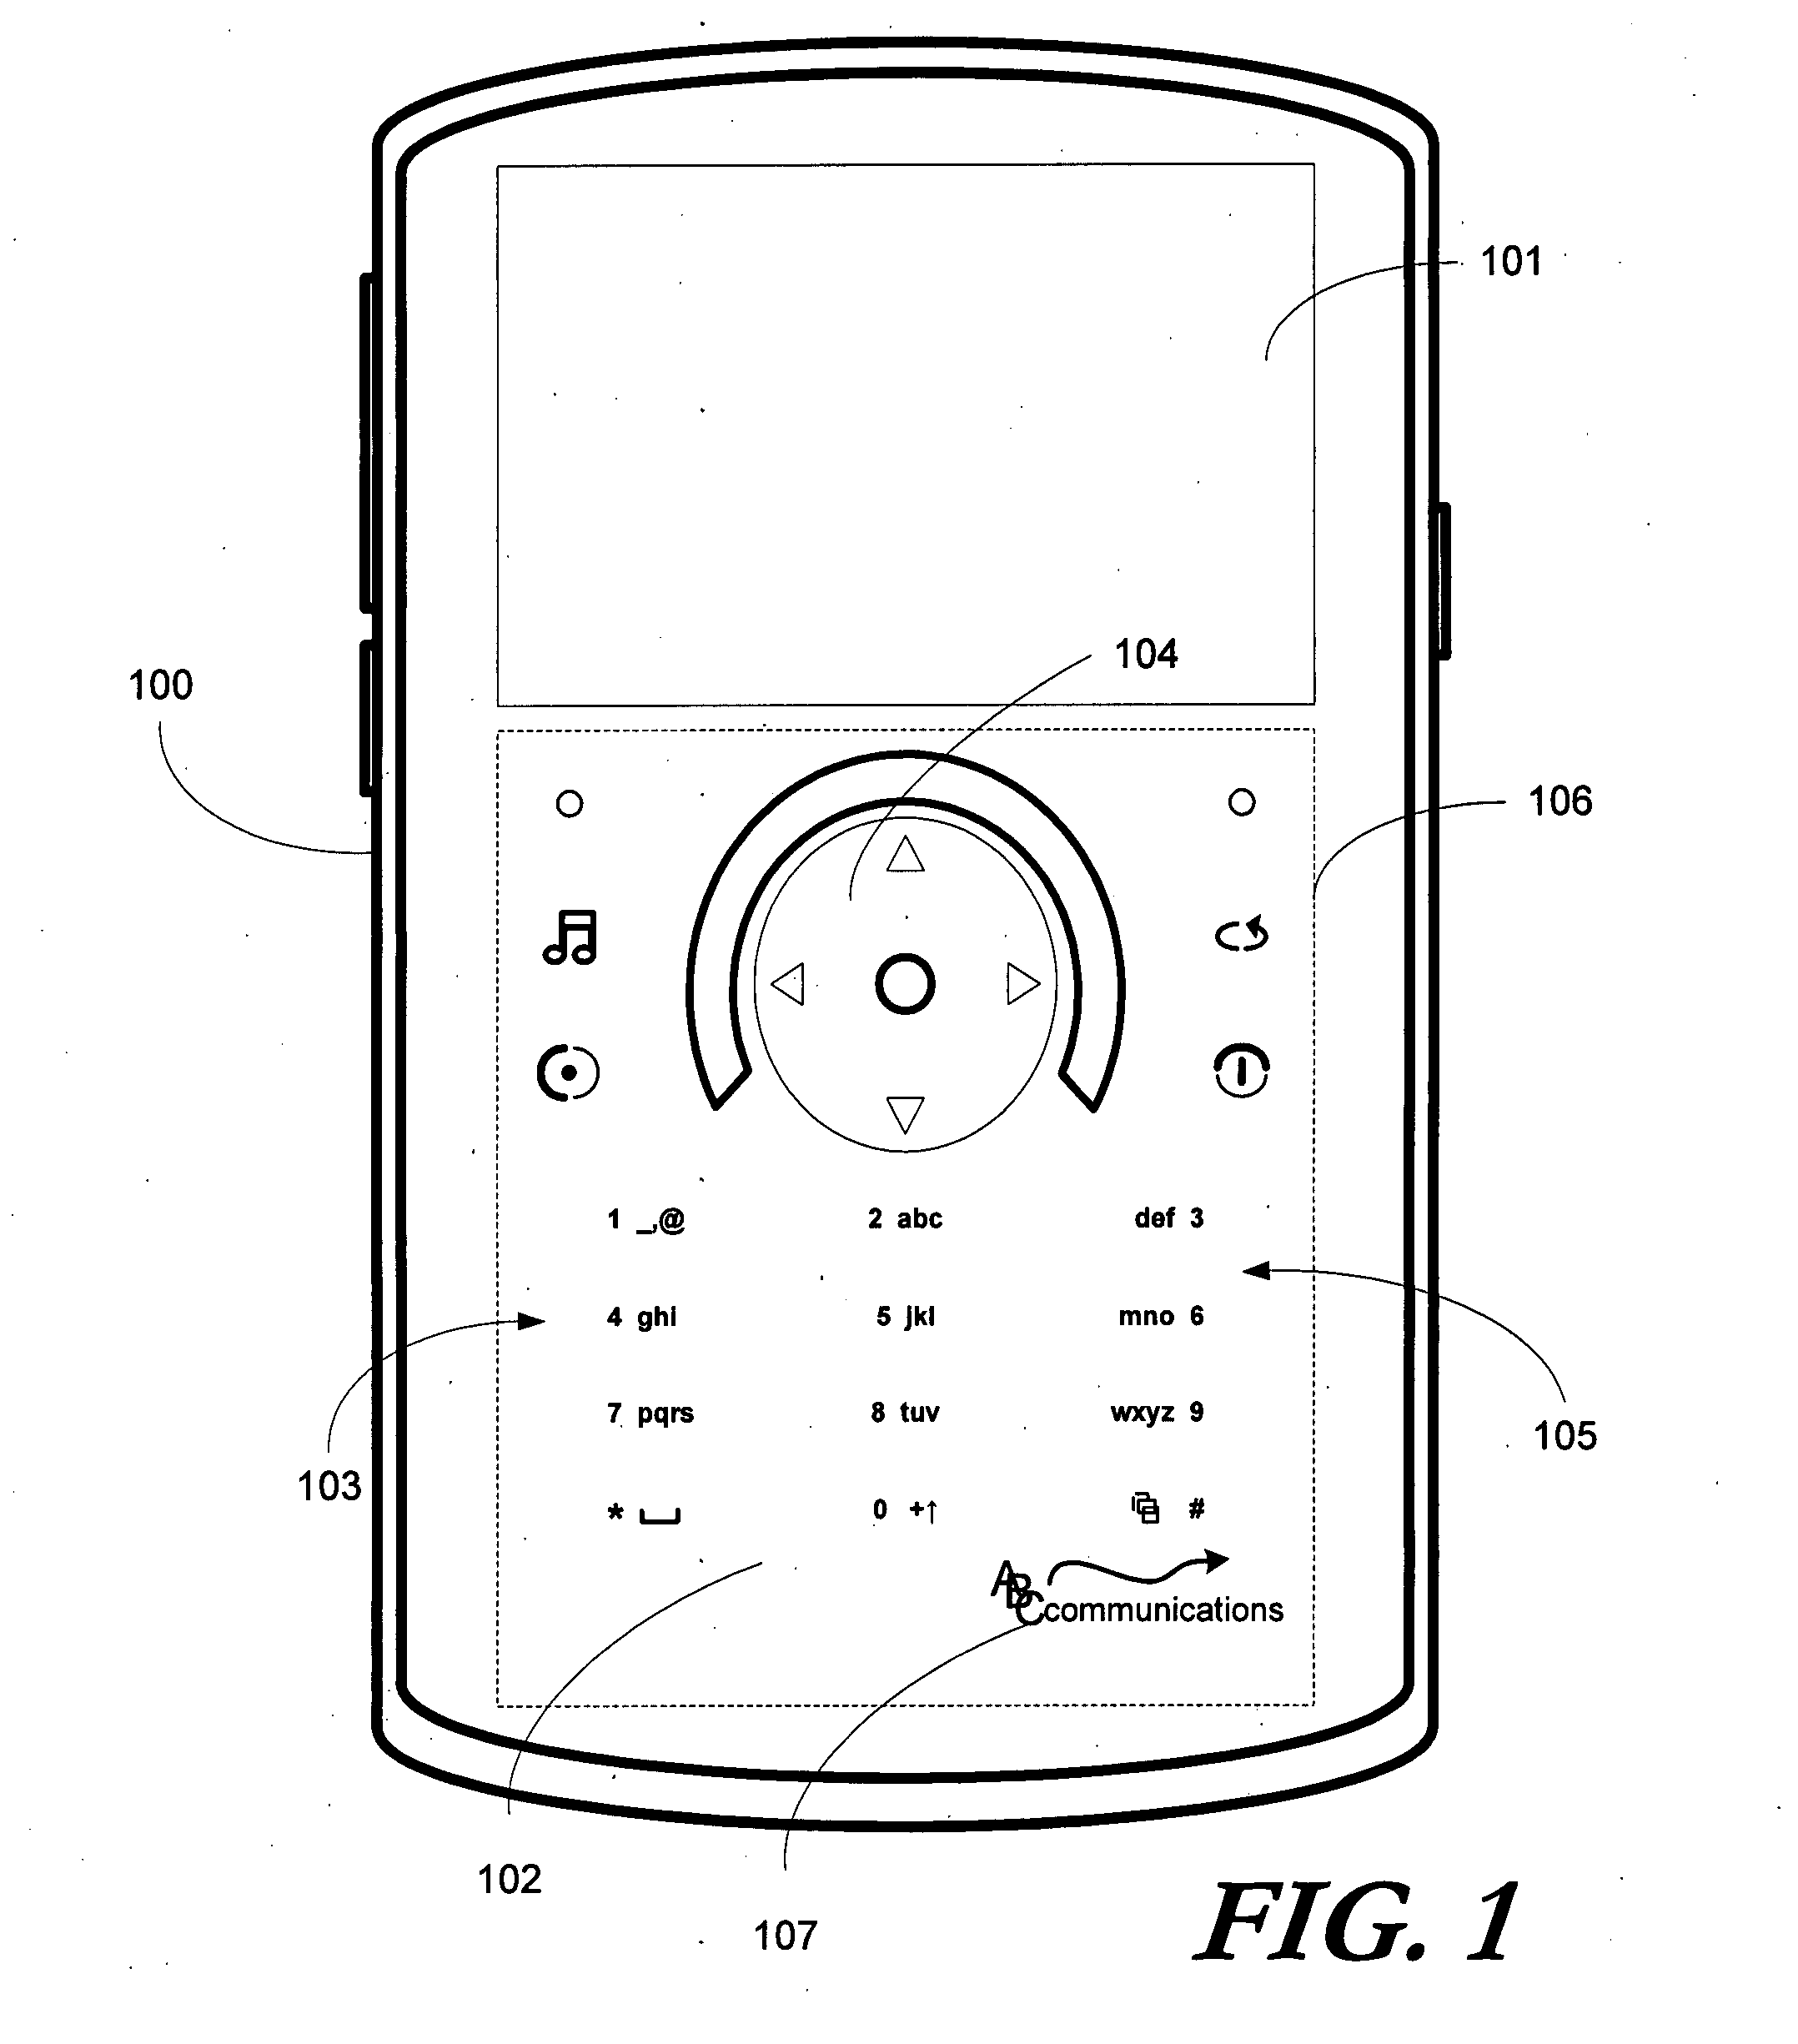 Multimodal Adaptive User Interface for an Electronic Device with Digital Branding Capabilities